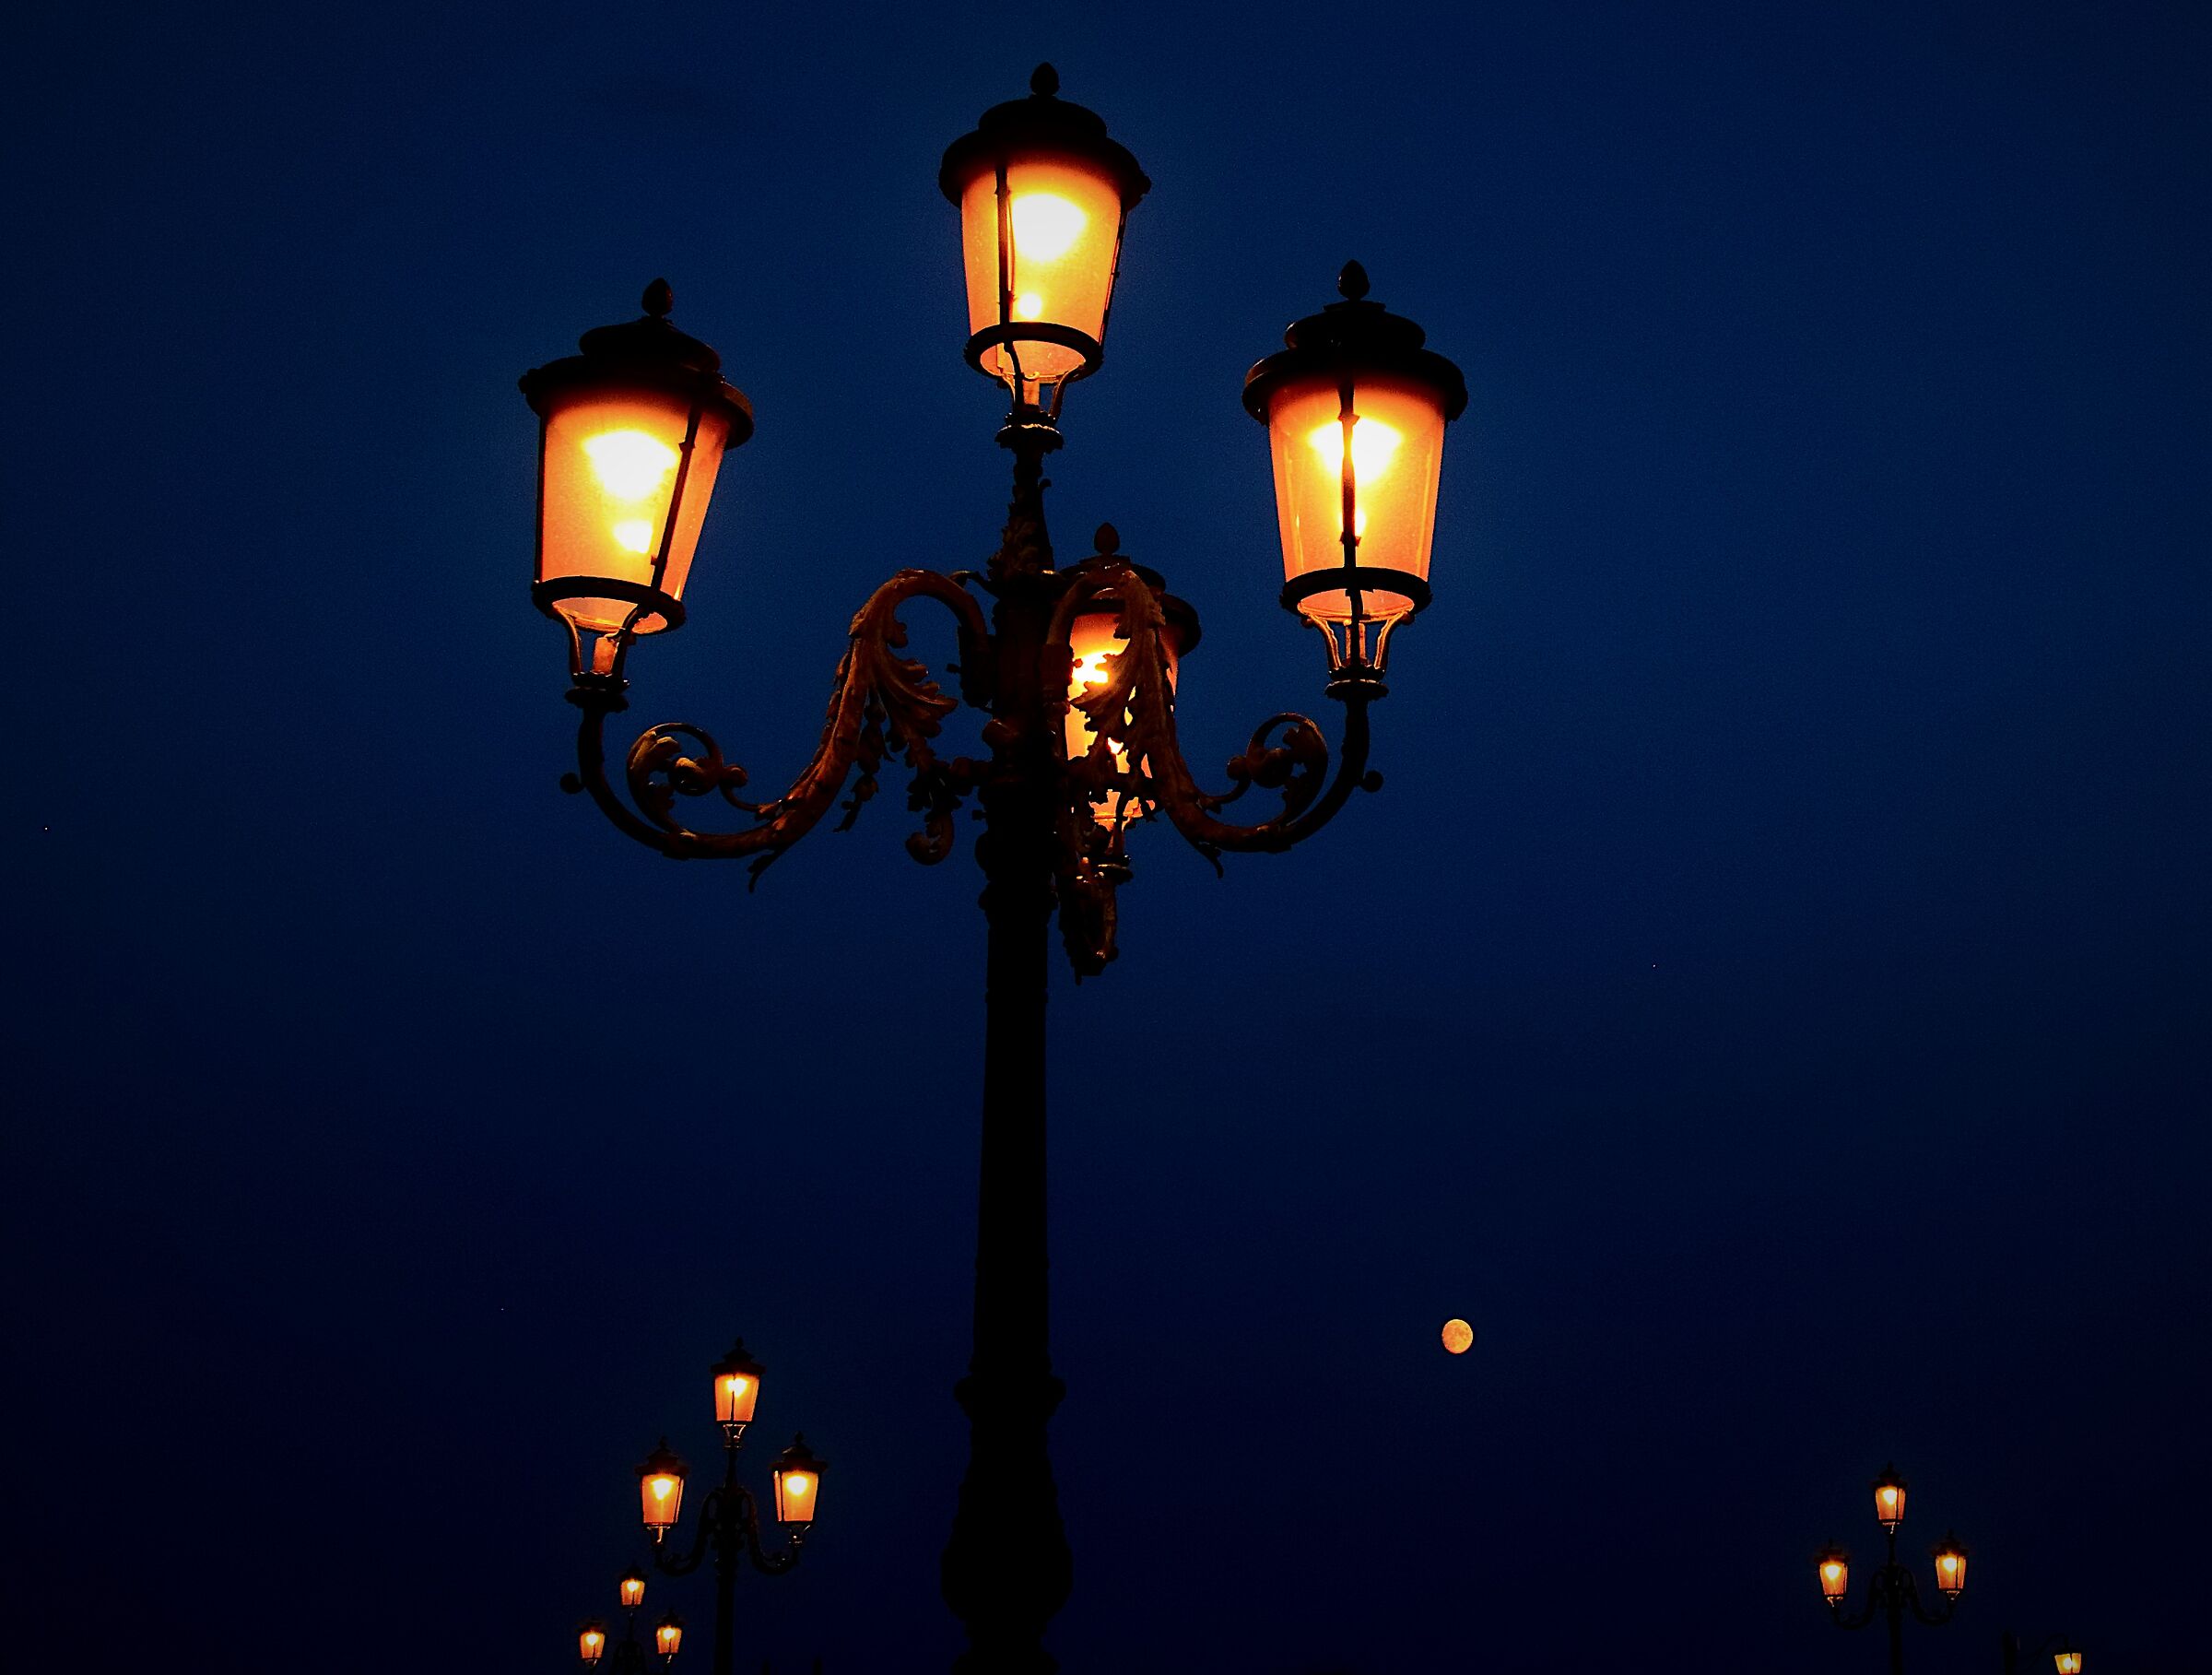 Street lamps ... and not only...